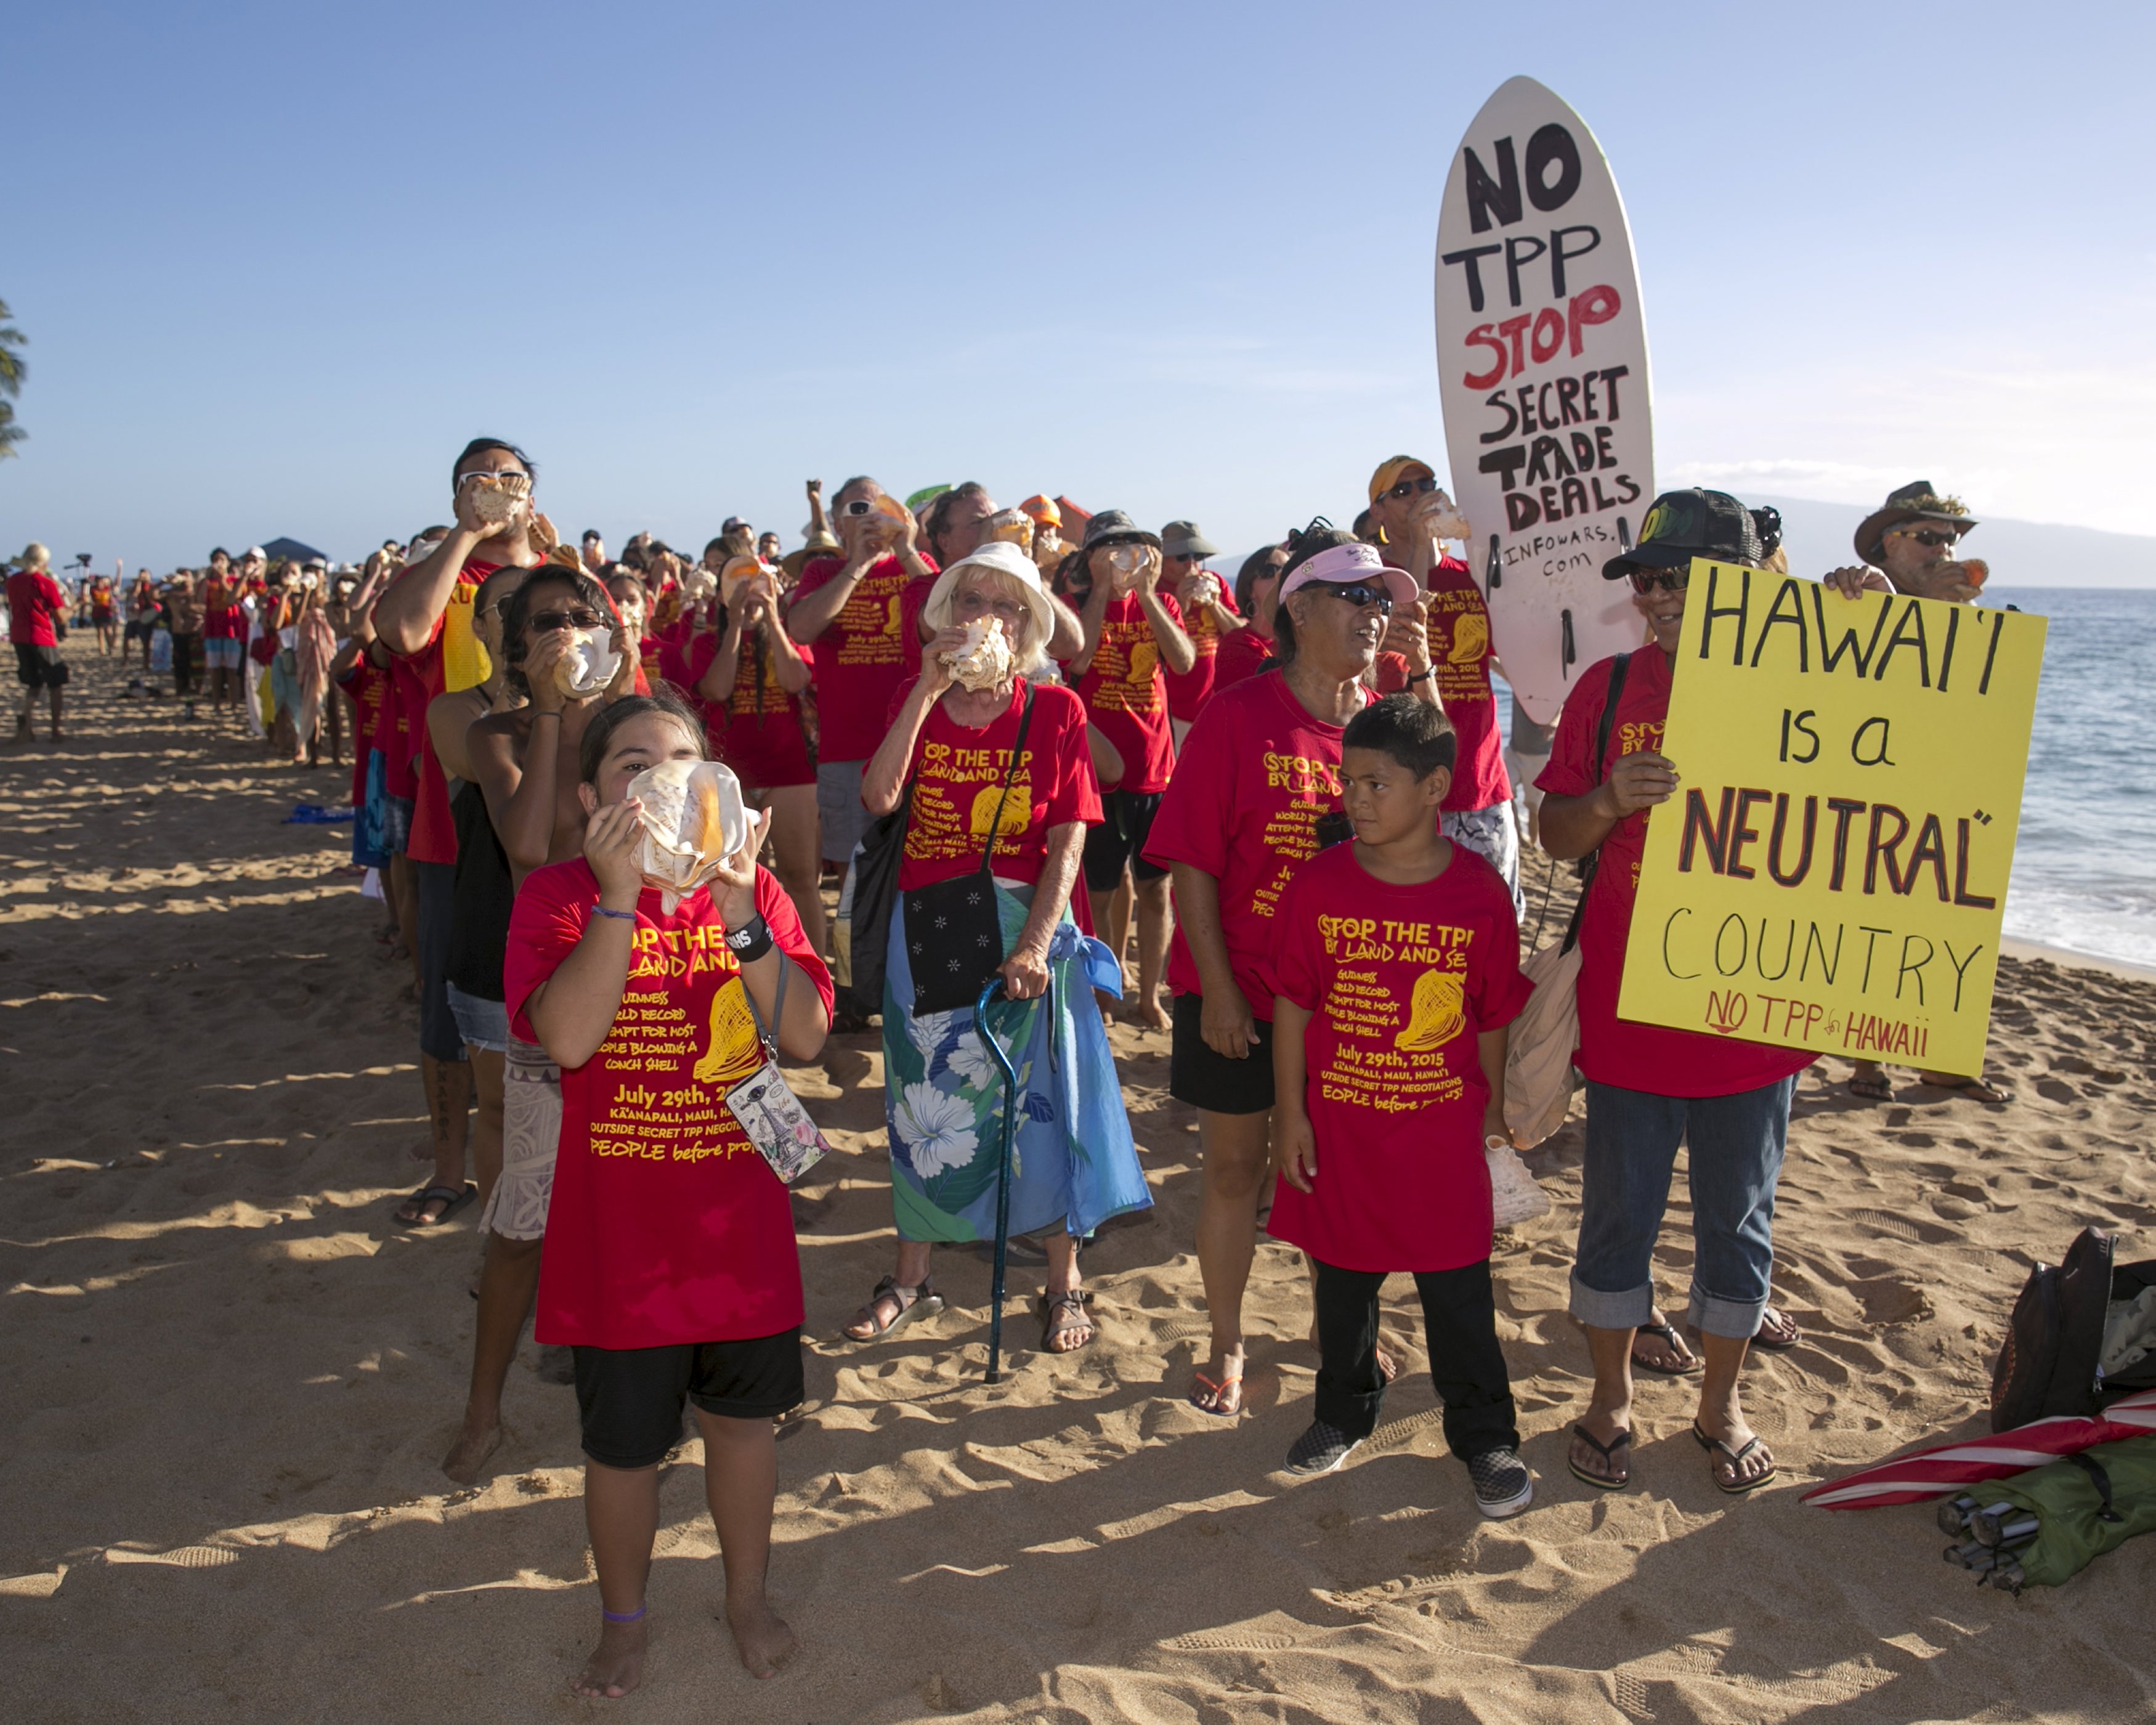 Protestors gather on the beach near the hotel where the Trans-Pacific Partnership (TPP) meeting is being held in Lahaina, Maui, Hawaii July 29, 2015.